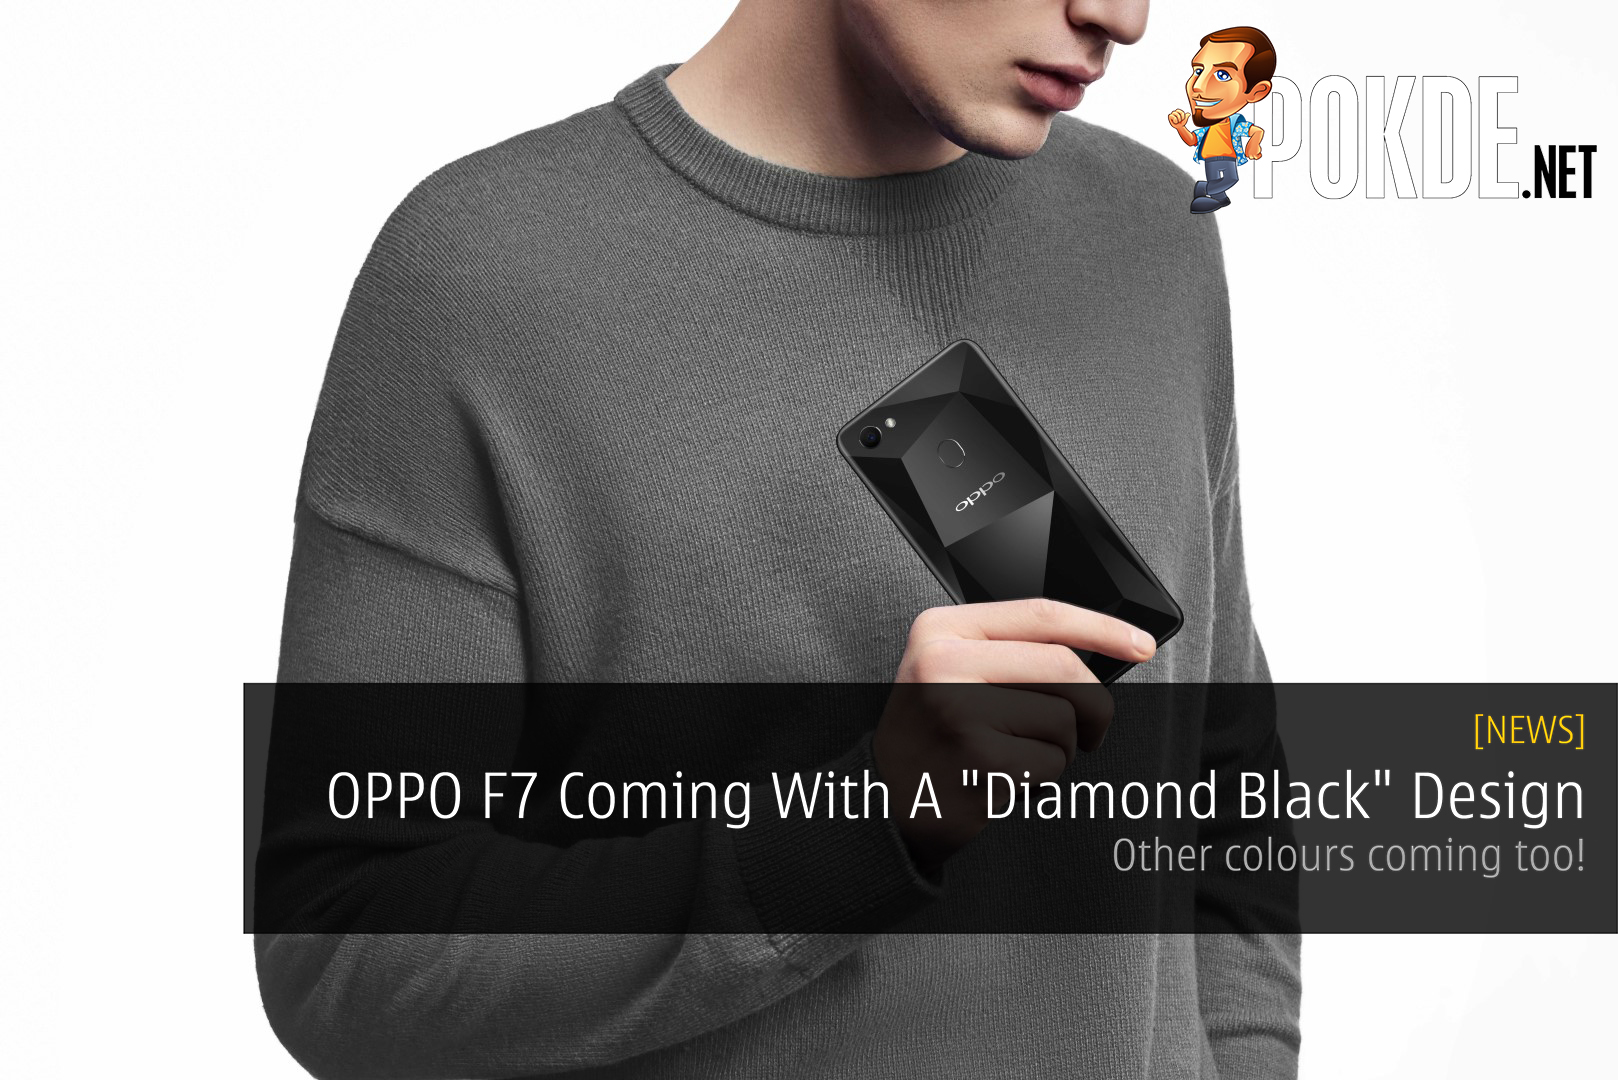 OPPO F7 Coming With A "Diamond Black" Design - Other colours coming too! 37